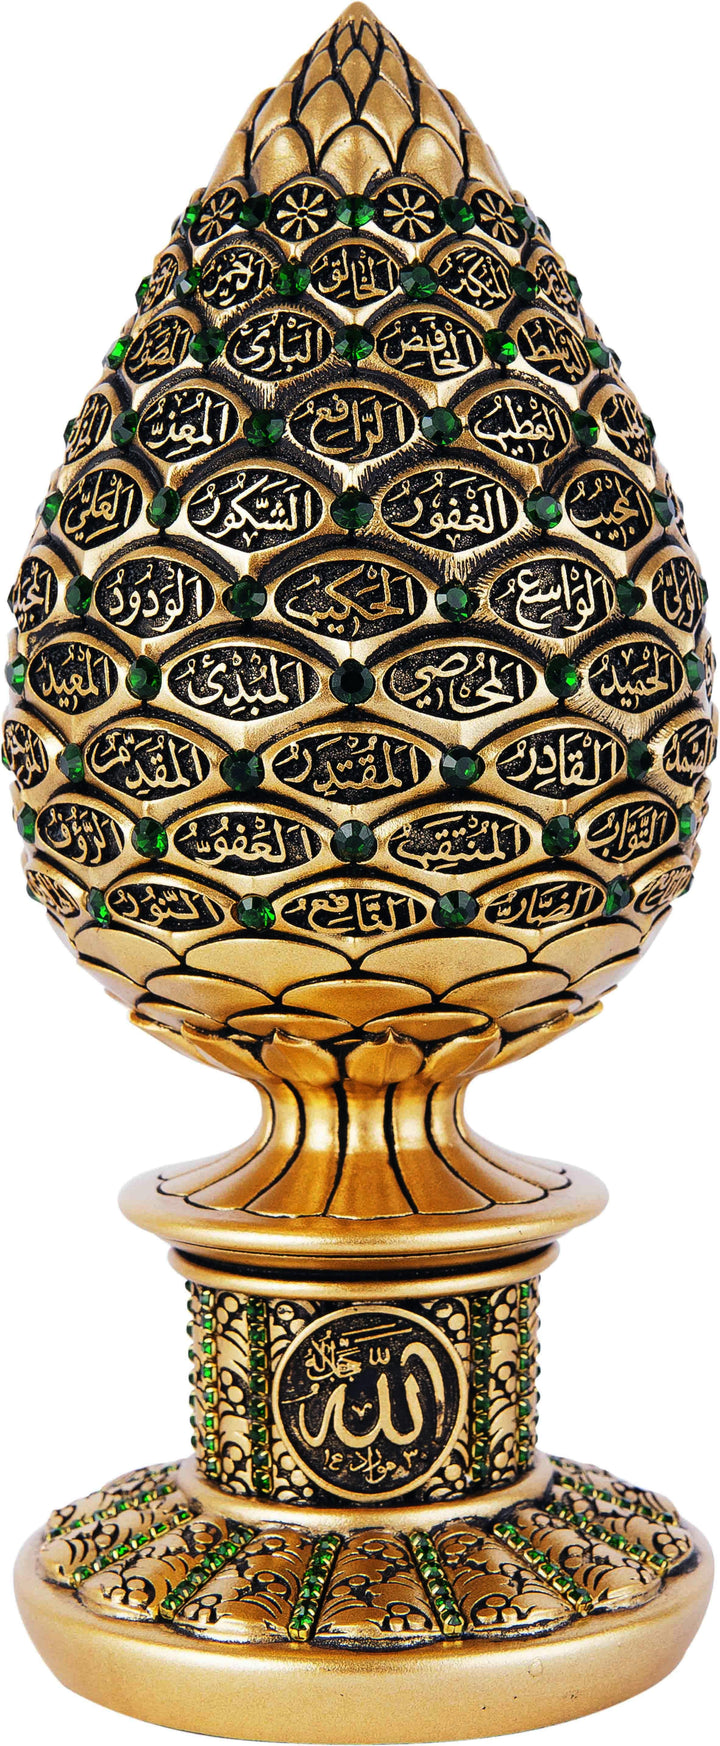 Islamic Table Decor Golden pine cone with Green stones - 99 Names of Allah Alif collection BB-0913-1634-theislamicshop.com